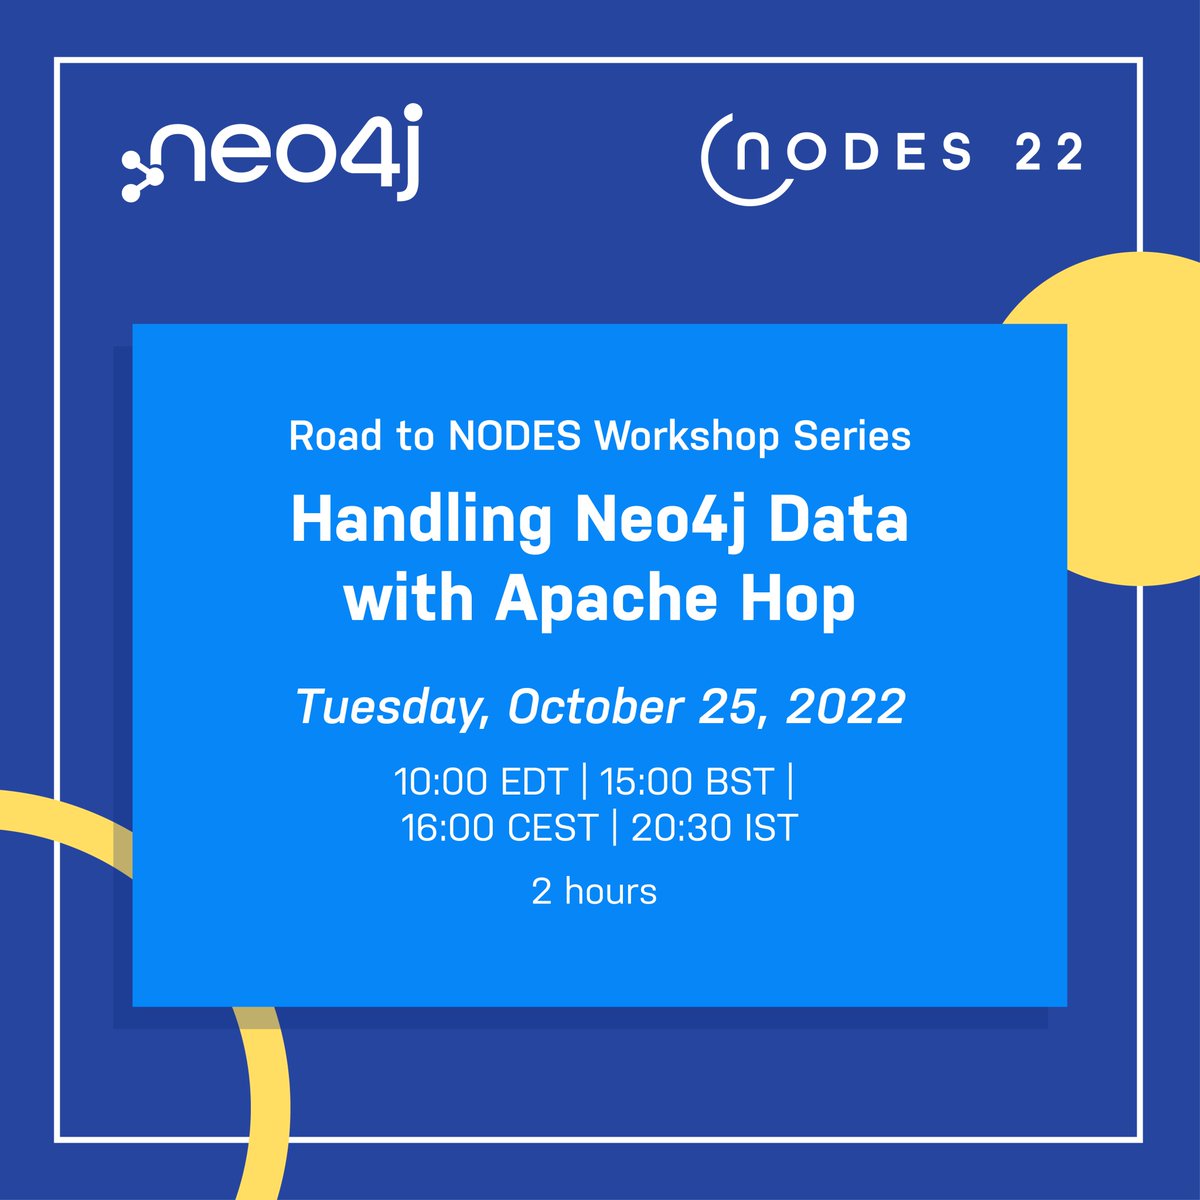 Next Tuesday it's happening! Our free 2h #NODES2022 workshop will showcase how you can use @ApacheHop to handle your Neo4j data. We've got lots of really cool and powerful things to show so join the crowd! You can register here: neo4j.com/event/nodes-tr…